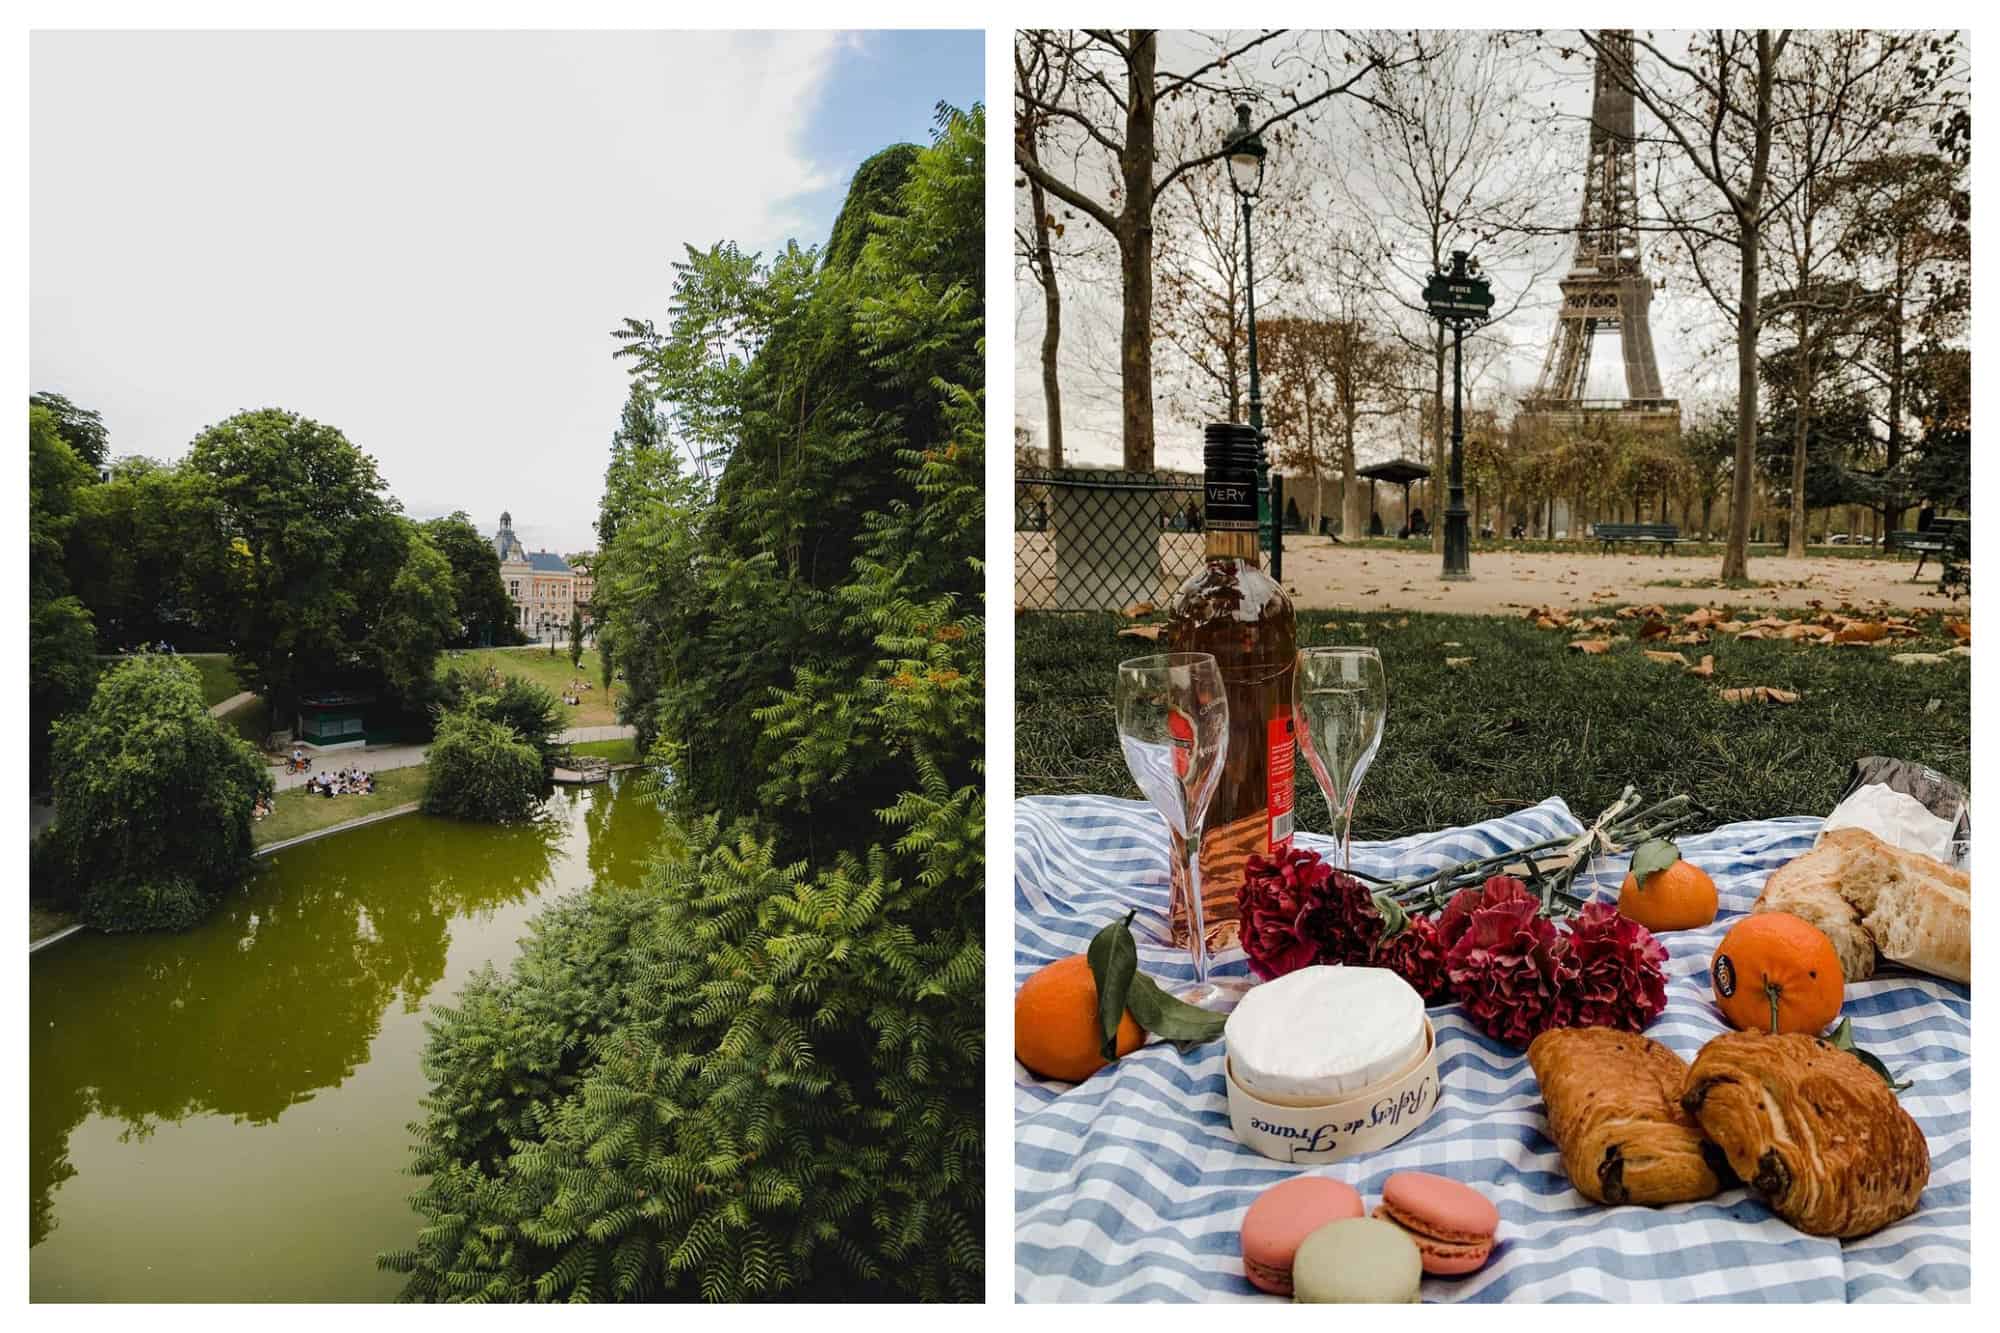 Left: Parc de Buttes Chaumont is sprouting green with a reflect
Right: A typical Parisian picnic blanket with bread, cheese, fruits, flowers, macarons, and wine.